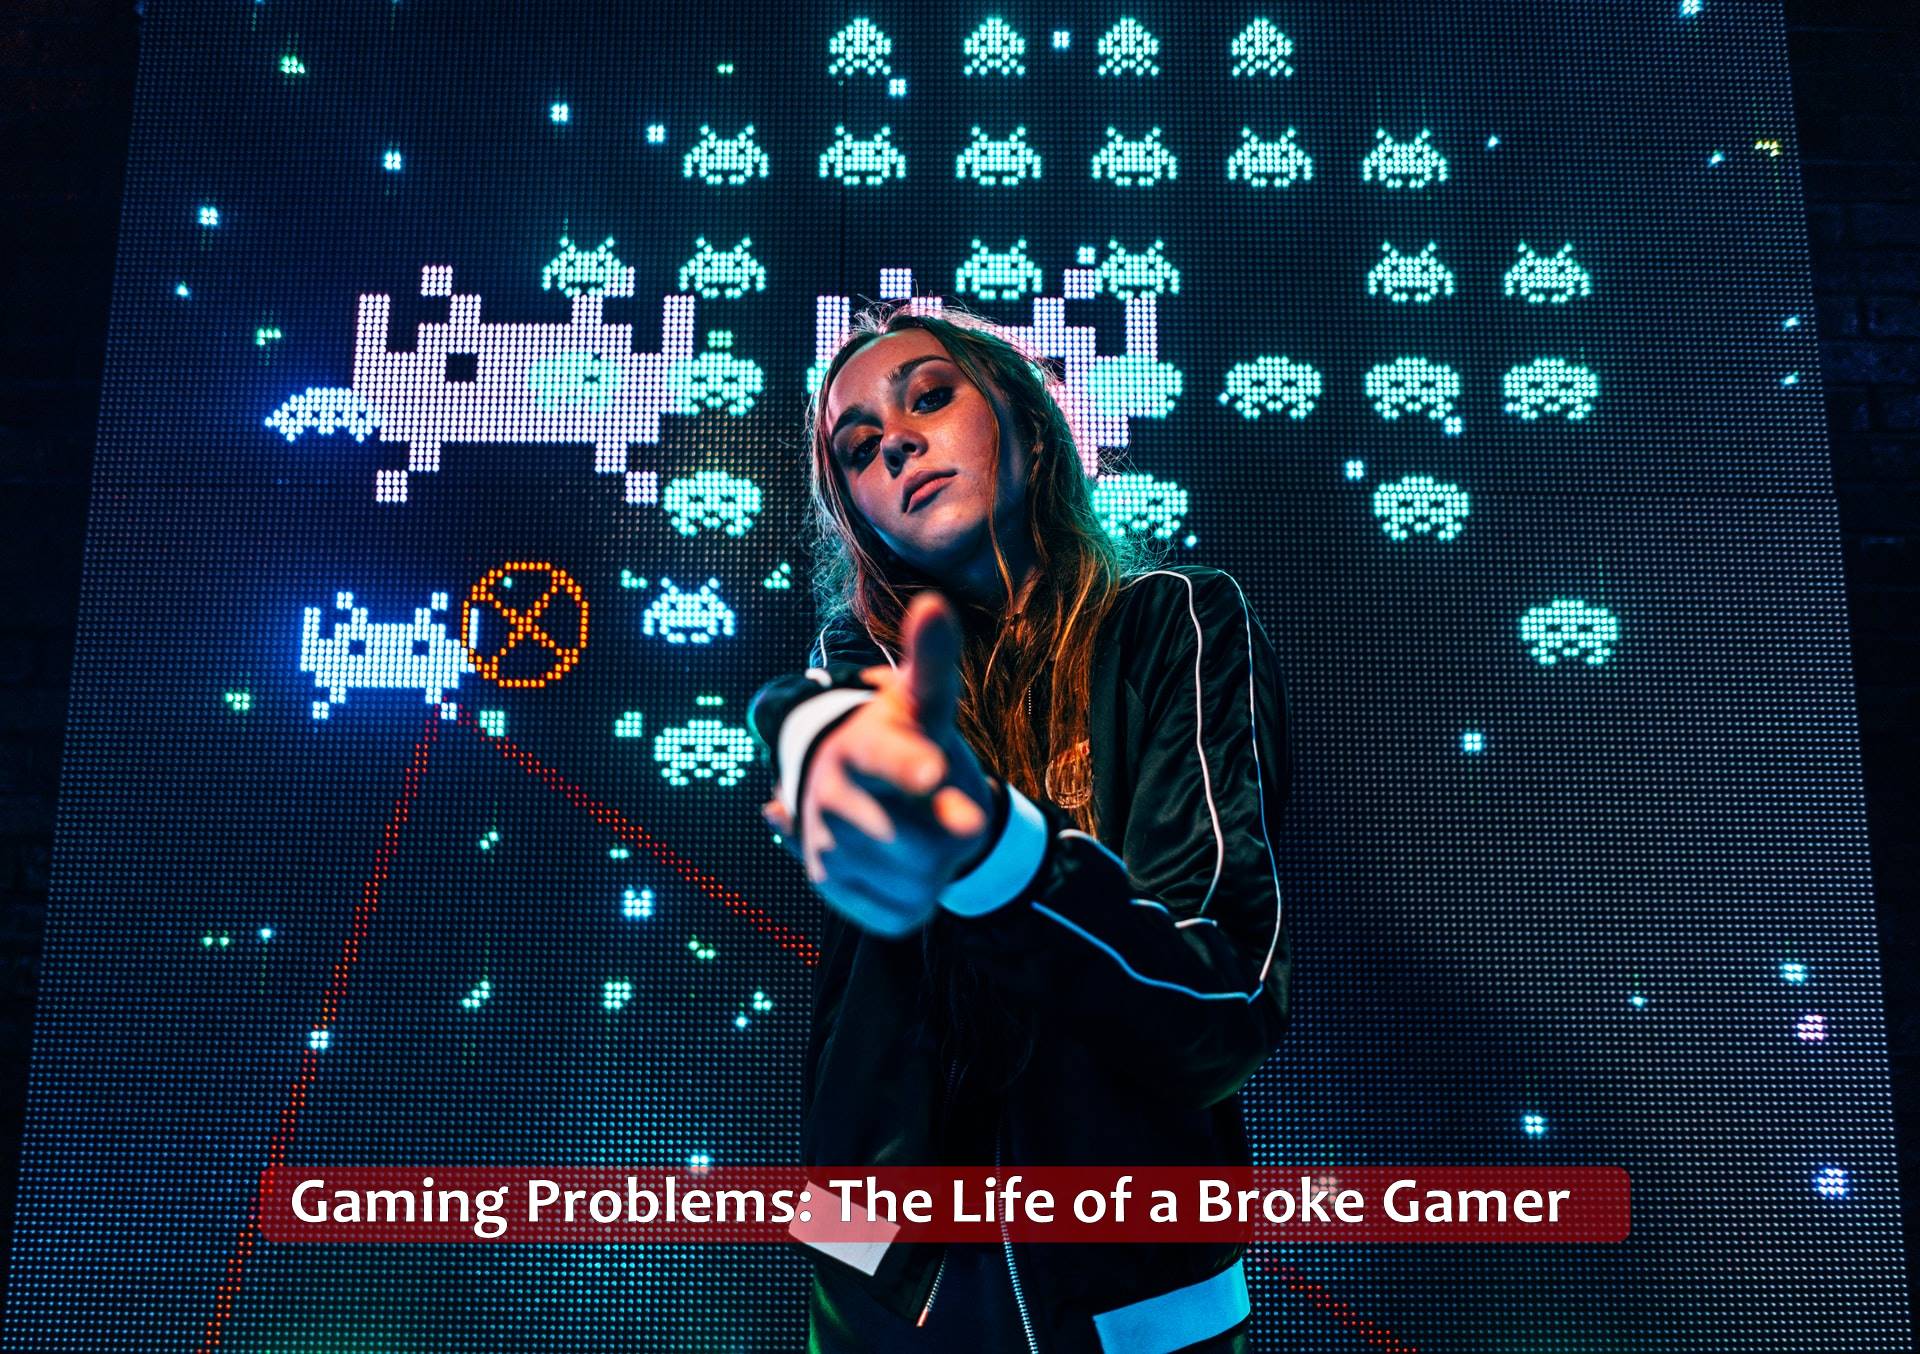 Gaming Problems: The Life of a Broke Gamer